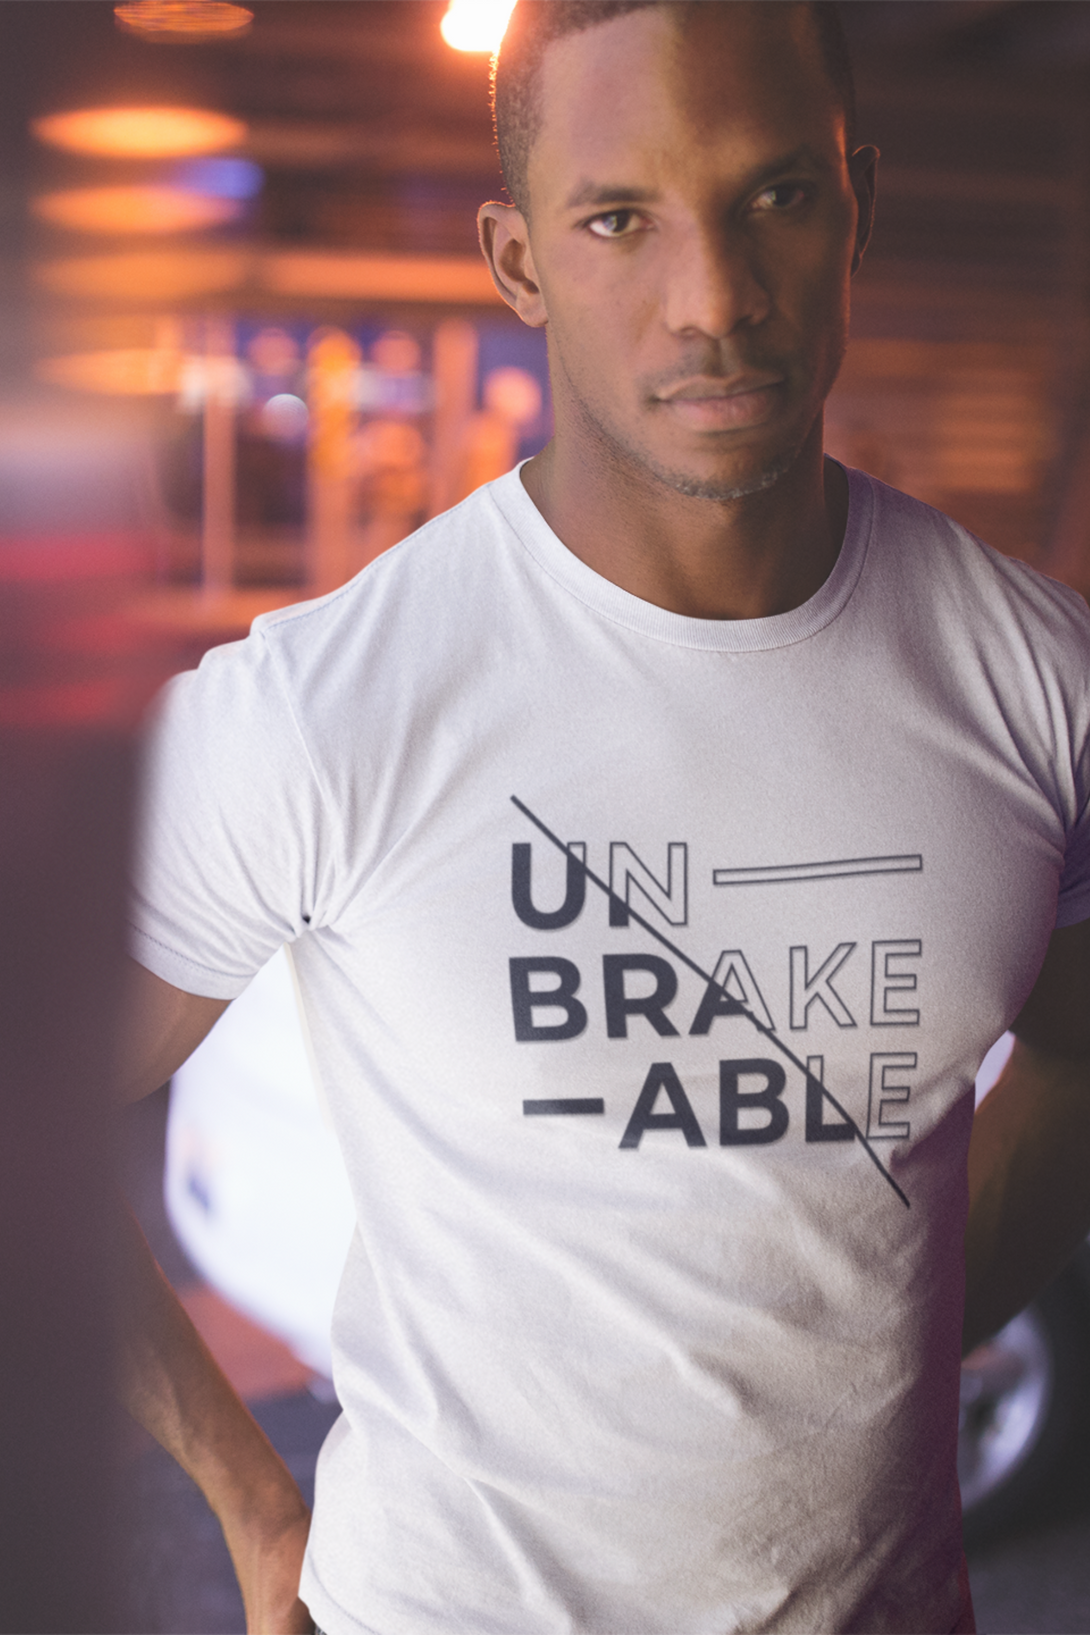 Unbreakable Printed T-Shirt For Men - WowWaves - 8